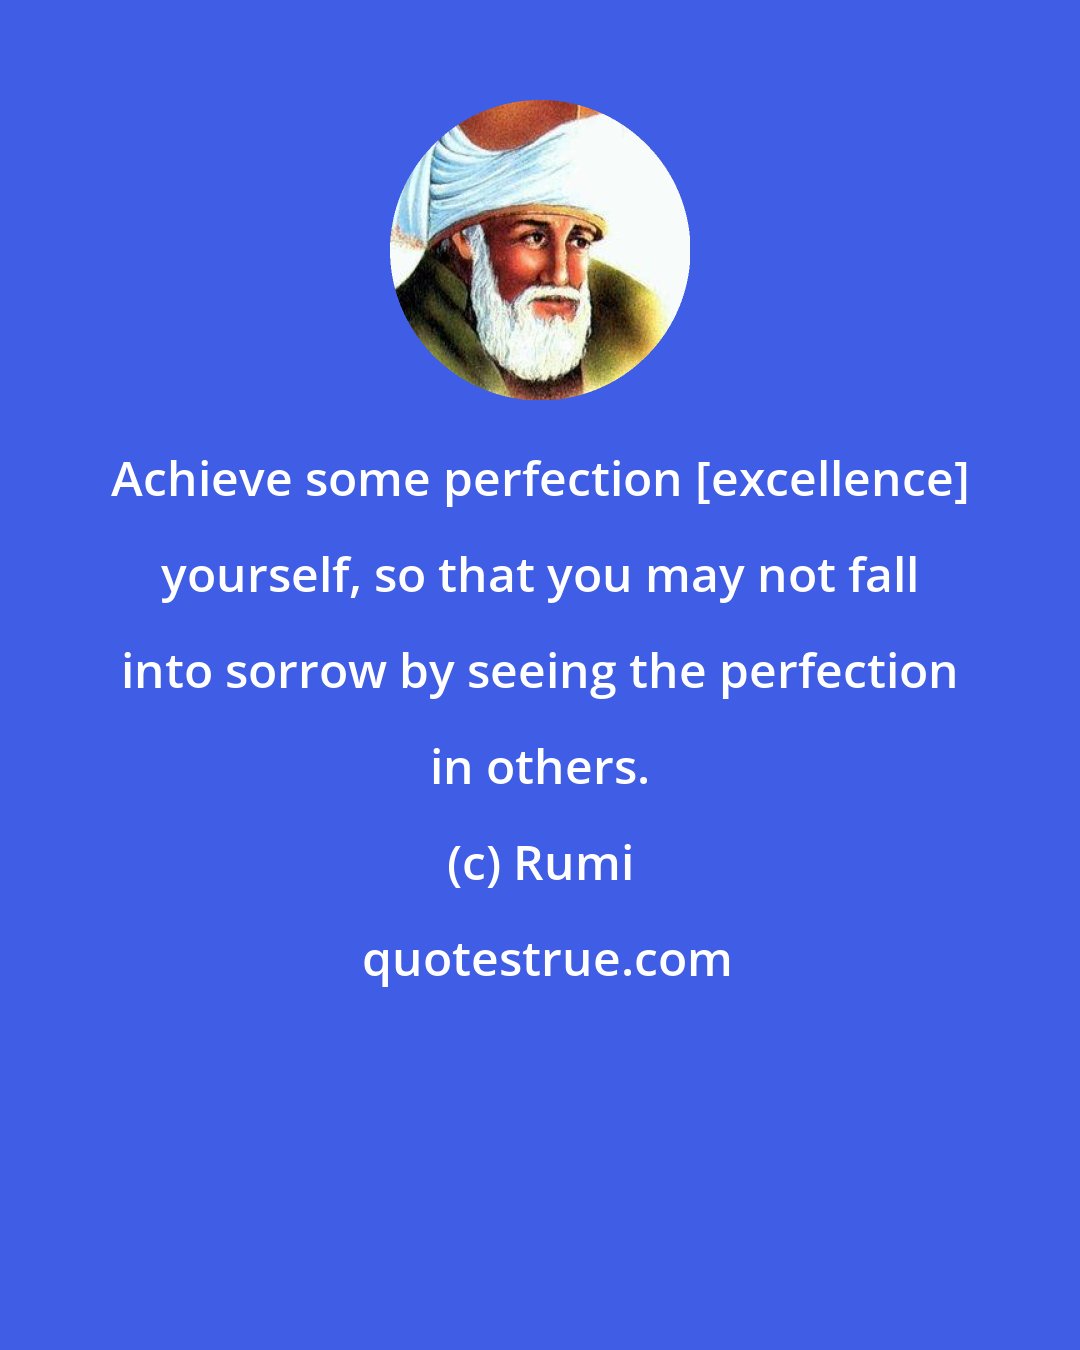 Rumi: Achieve some perfection [excellence] yourself, so that you may not fall into sorrow by seeing the perfection in others.